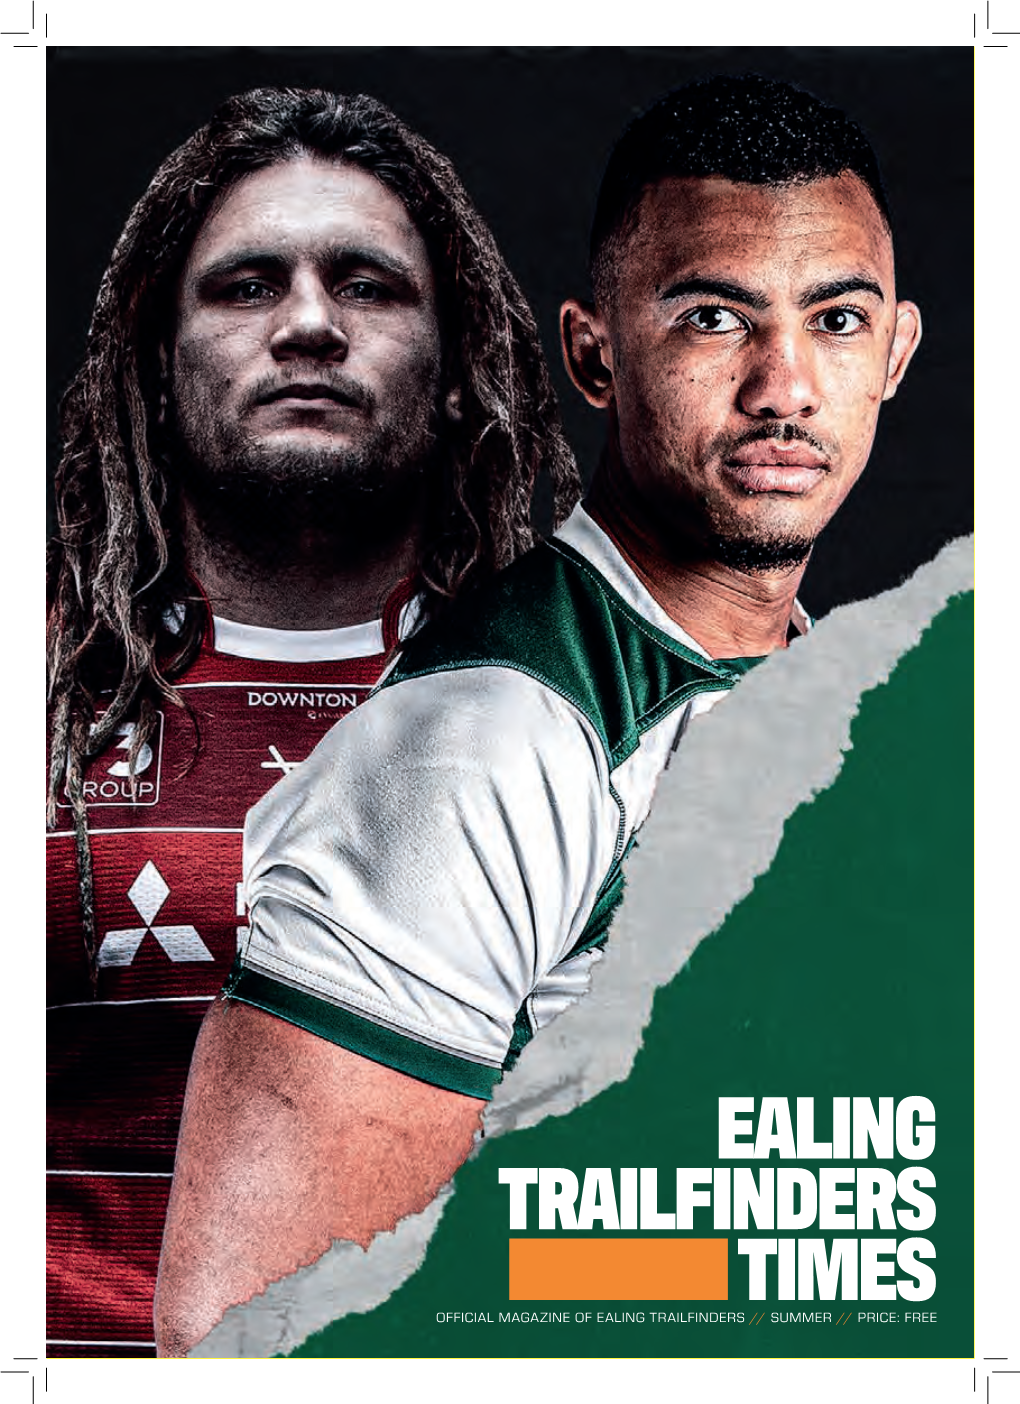 Ealing Trailfinders Times Official Magazine of Ealing Trailfinders // Summer // Price: Free 1//Summer Issue 188